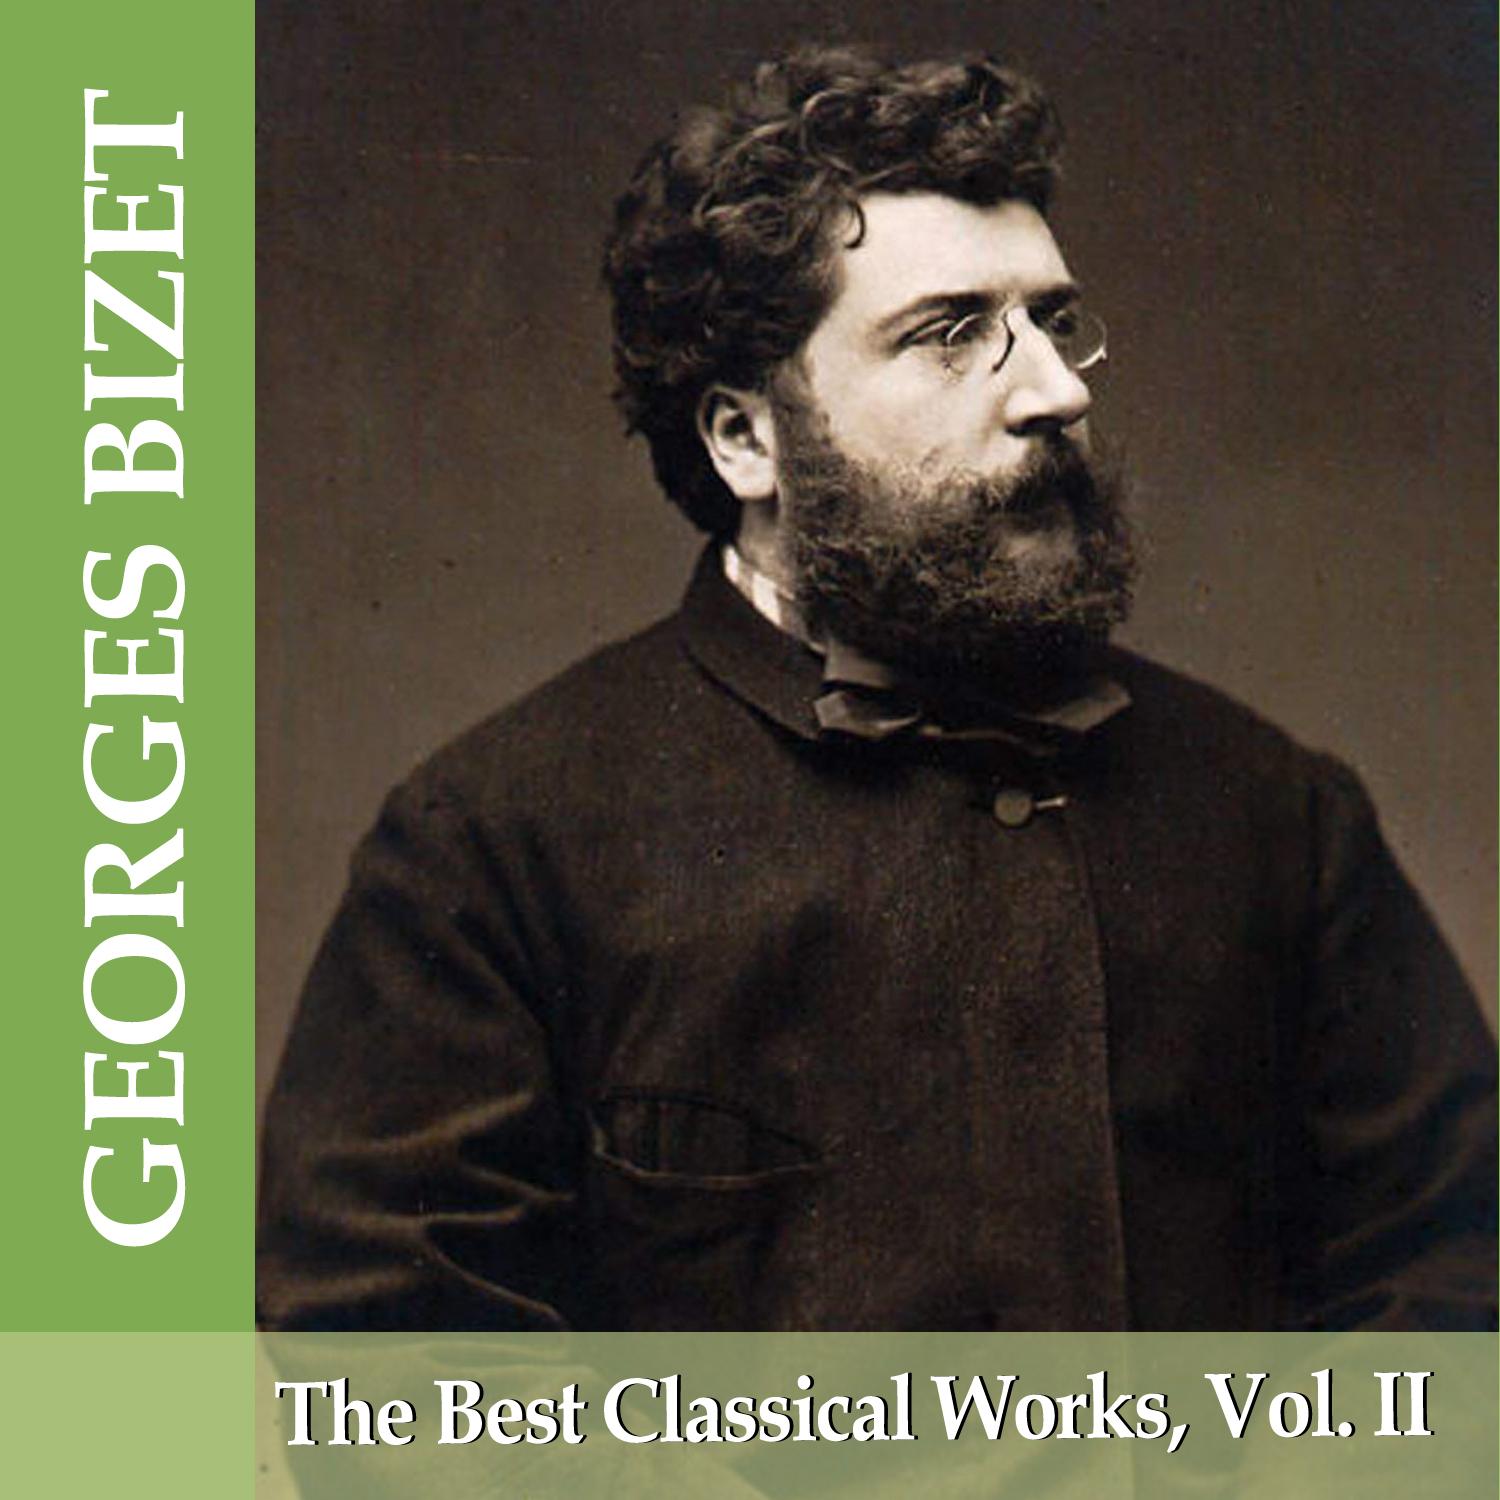 Georges Bizet: The Best Classical Works, Vol. II